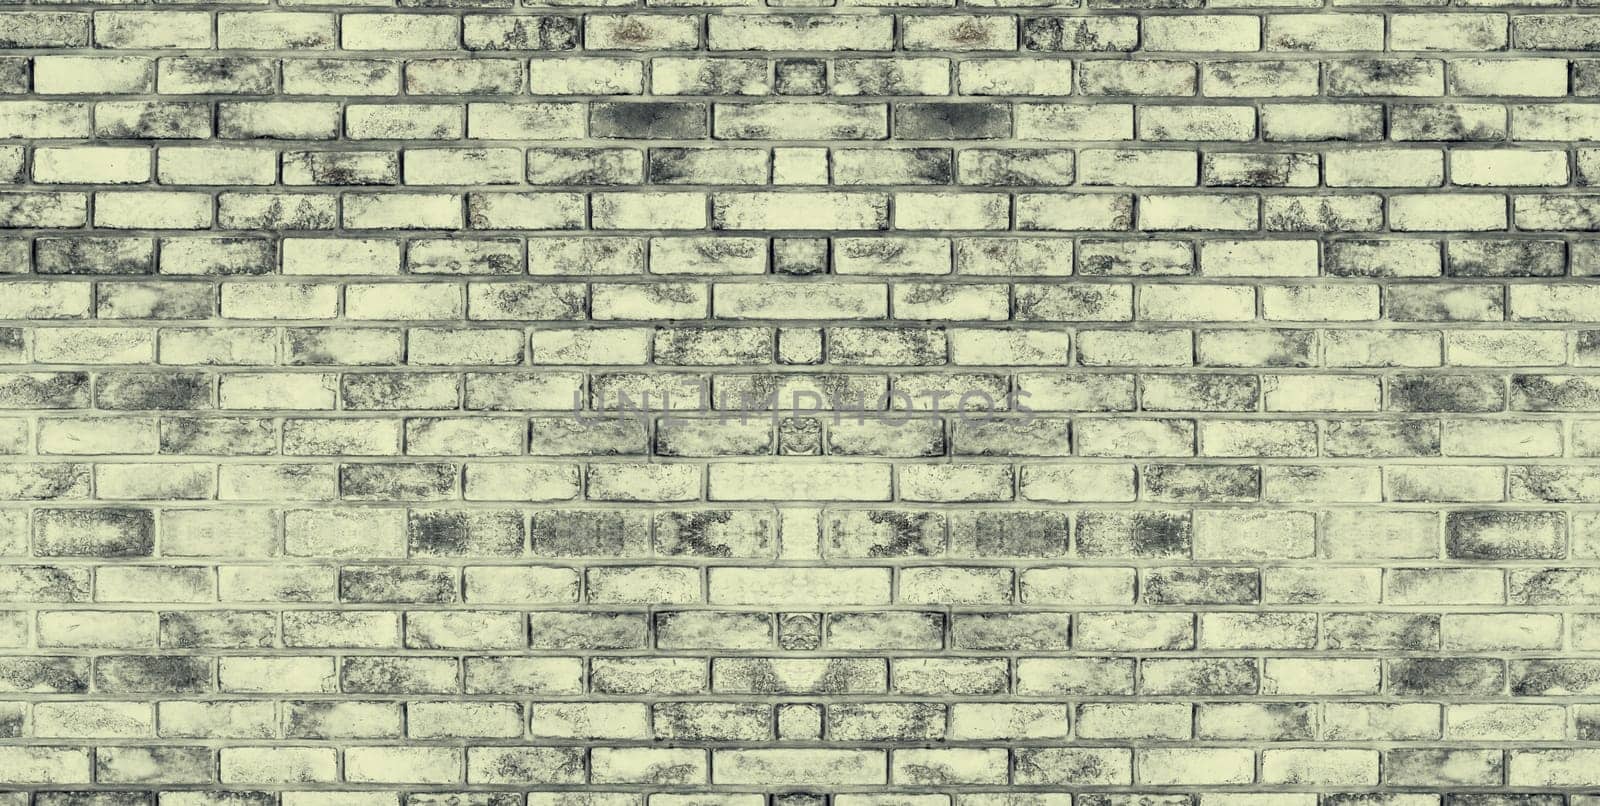 Background of brick wall with old texture pattern. uds by biancoblue